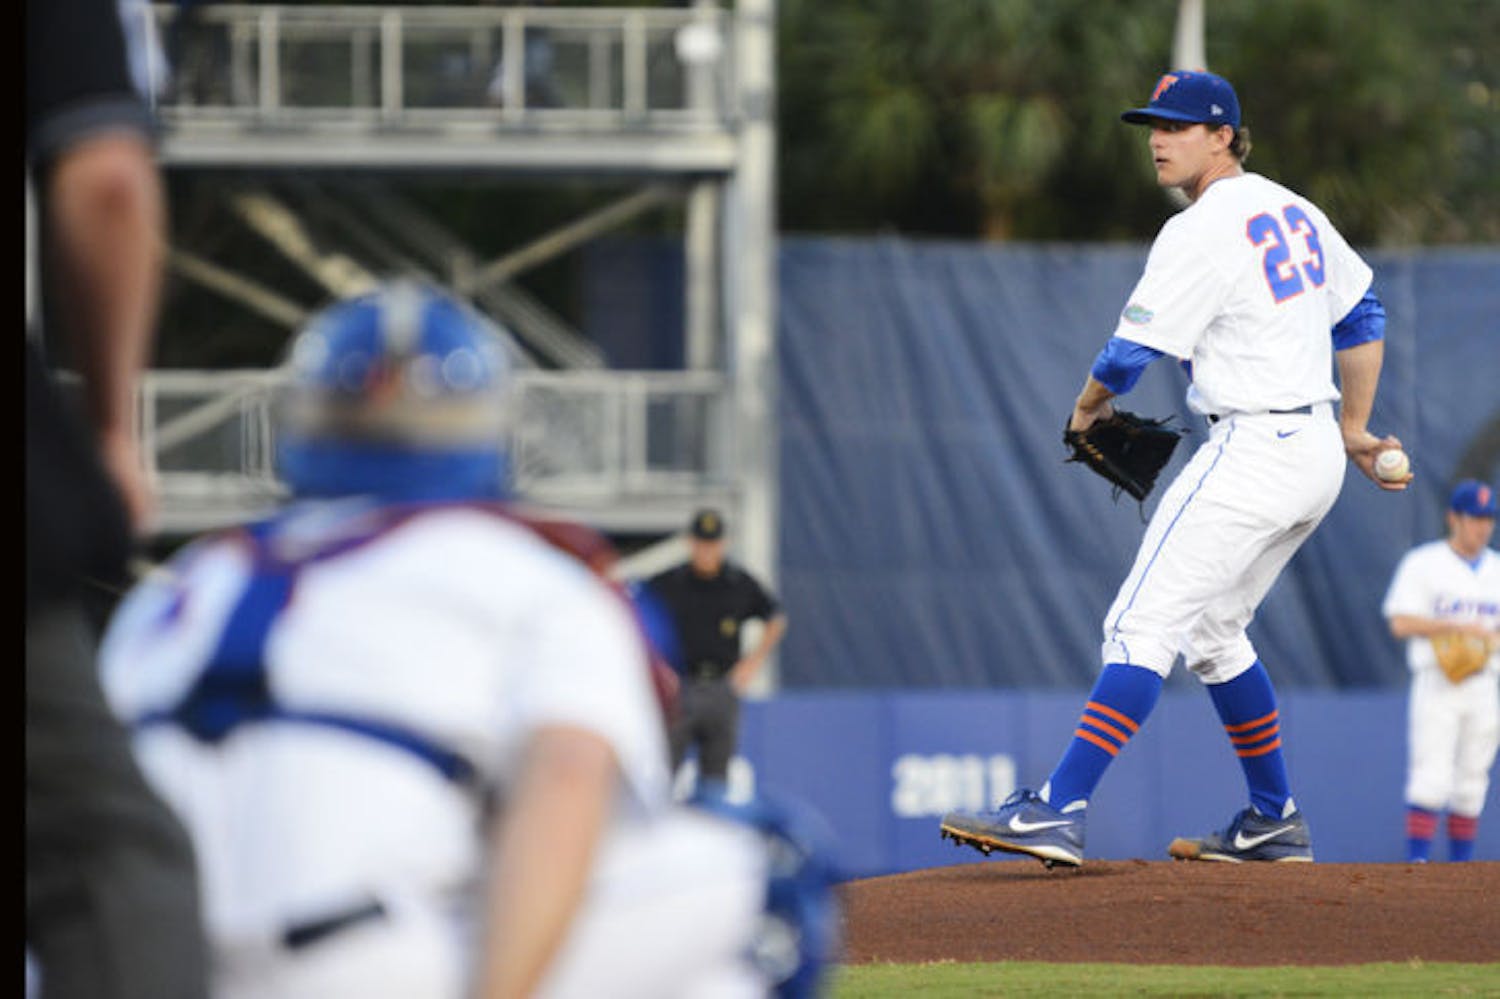 Junior starting pitcher Jonathon Crawford warms up on the mound during Florida’s 3-2 victory against South Carolina on April 11 at McKethan Stadium. Crawford gave up four runs in four innings against Auburn on Friday.